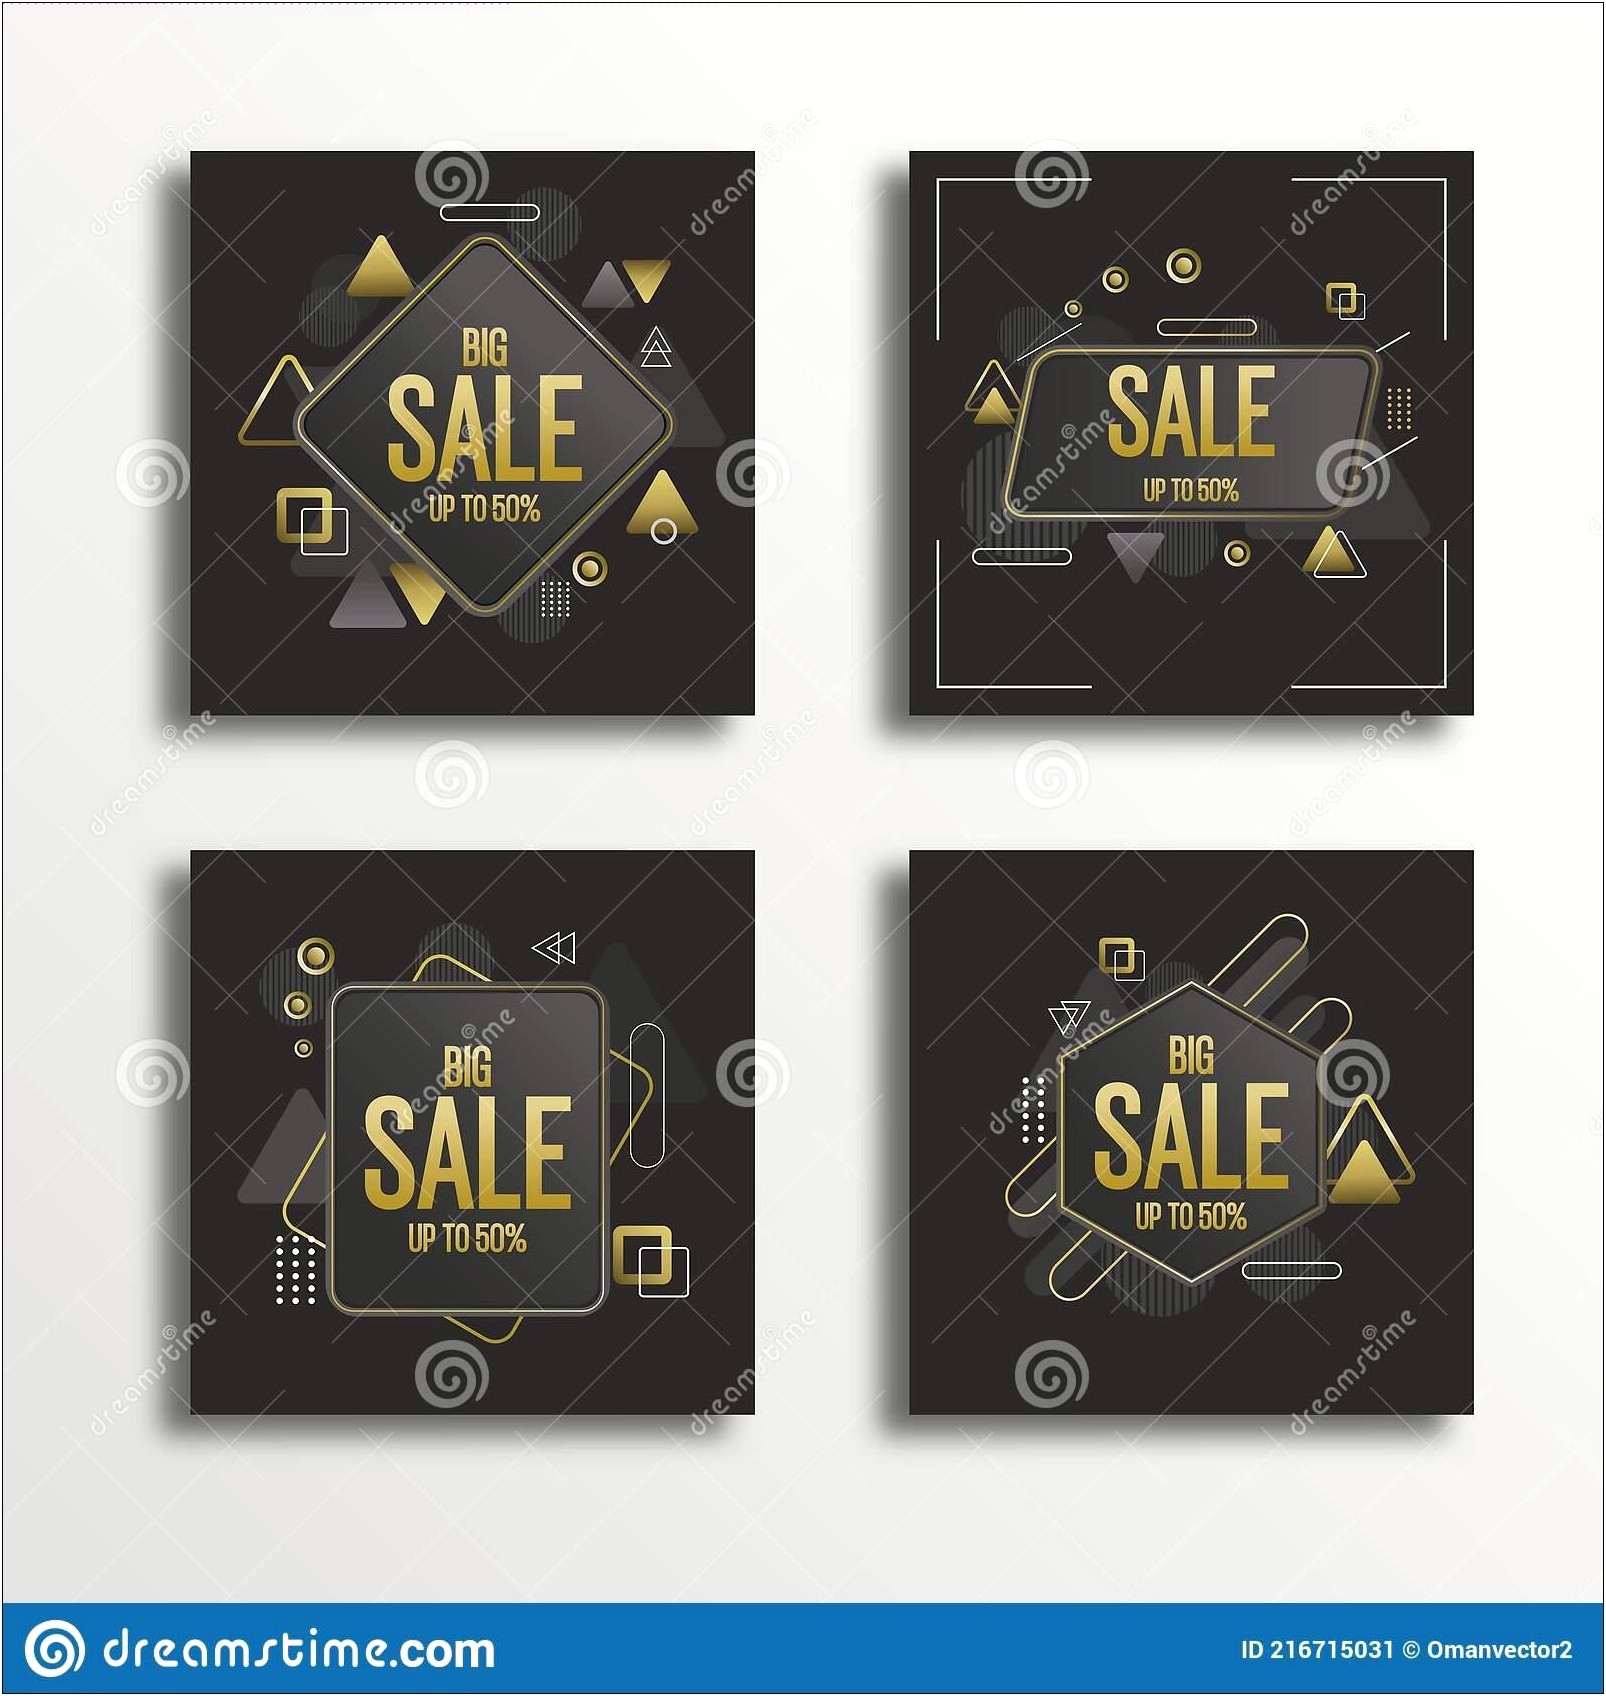 Digital Sales And Promotions Template Download Free